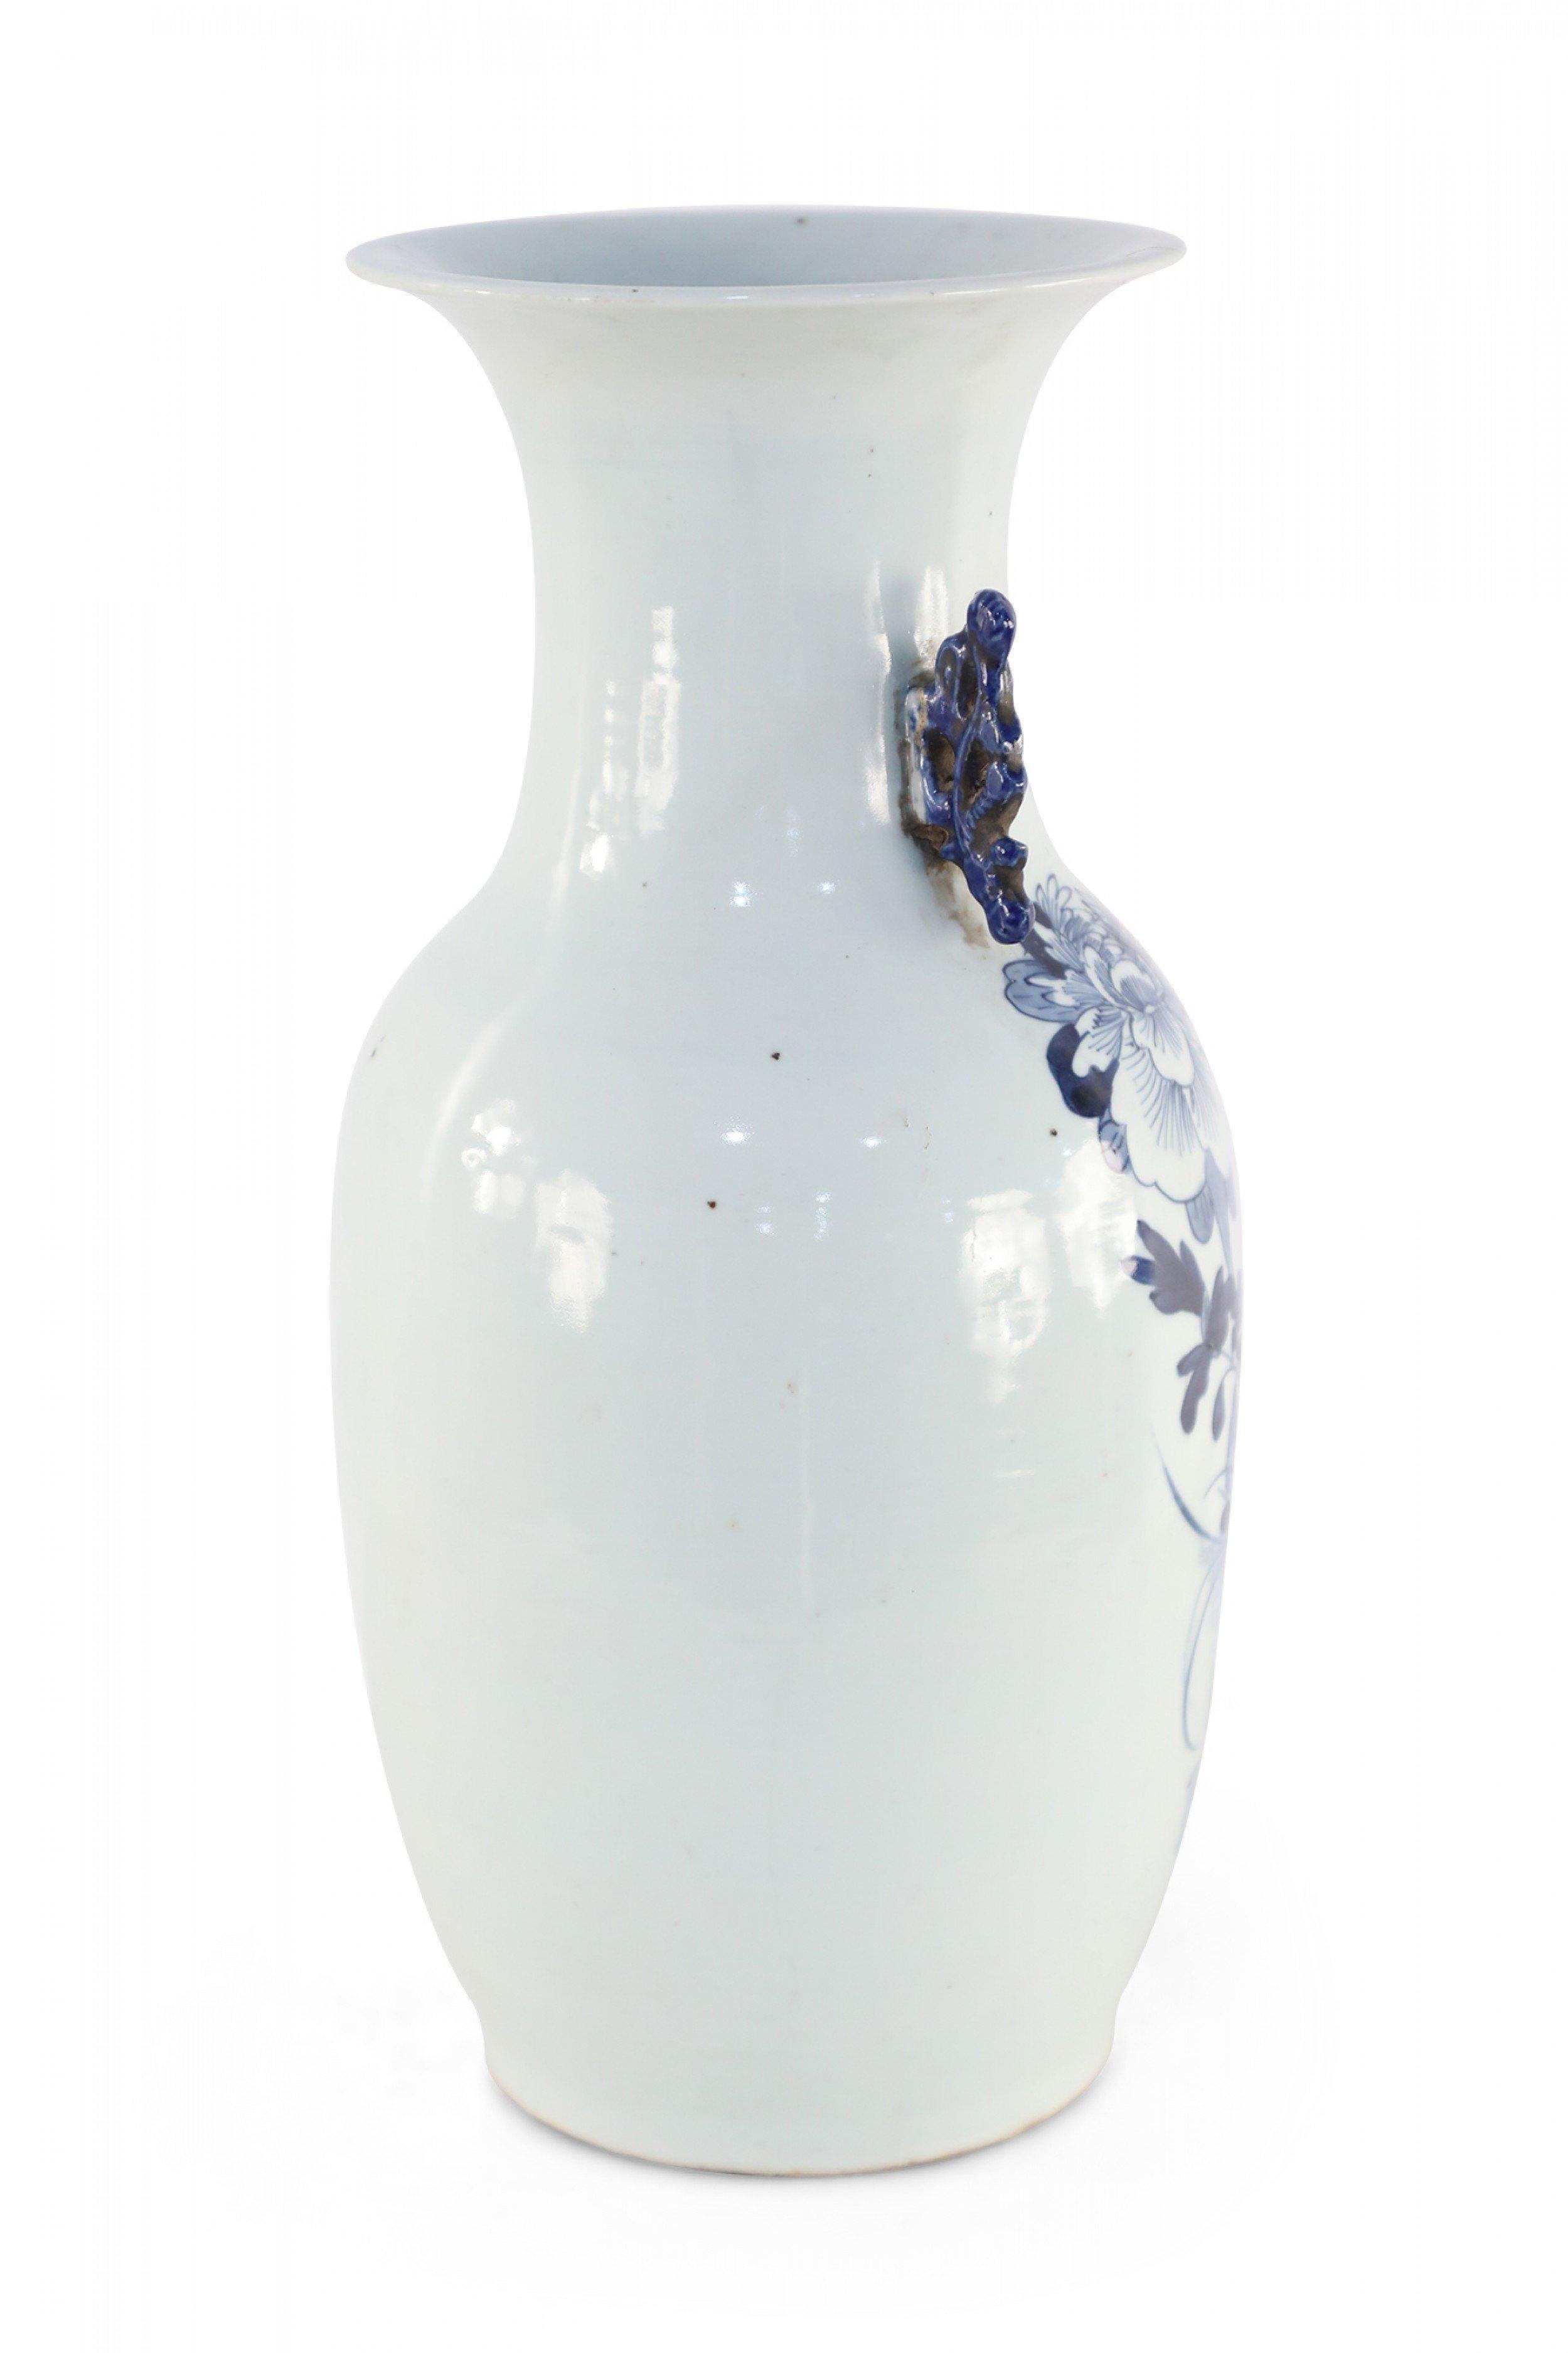 Chinese White and Blue Garden and Bird Design Porcelain Urn For Sale 2